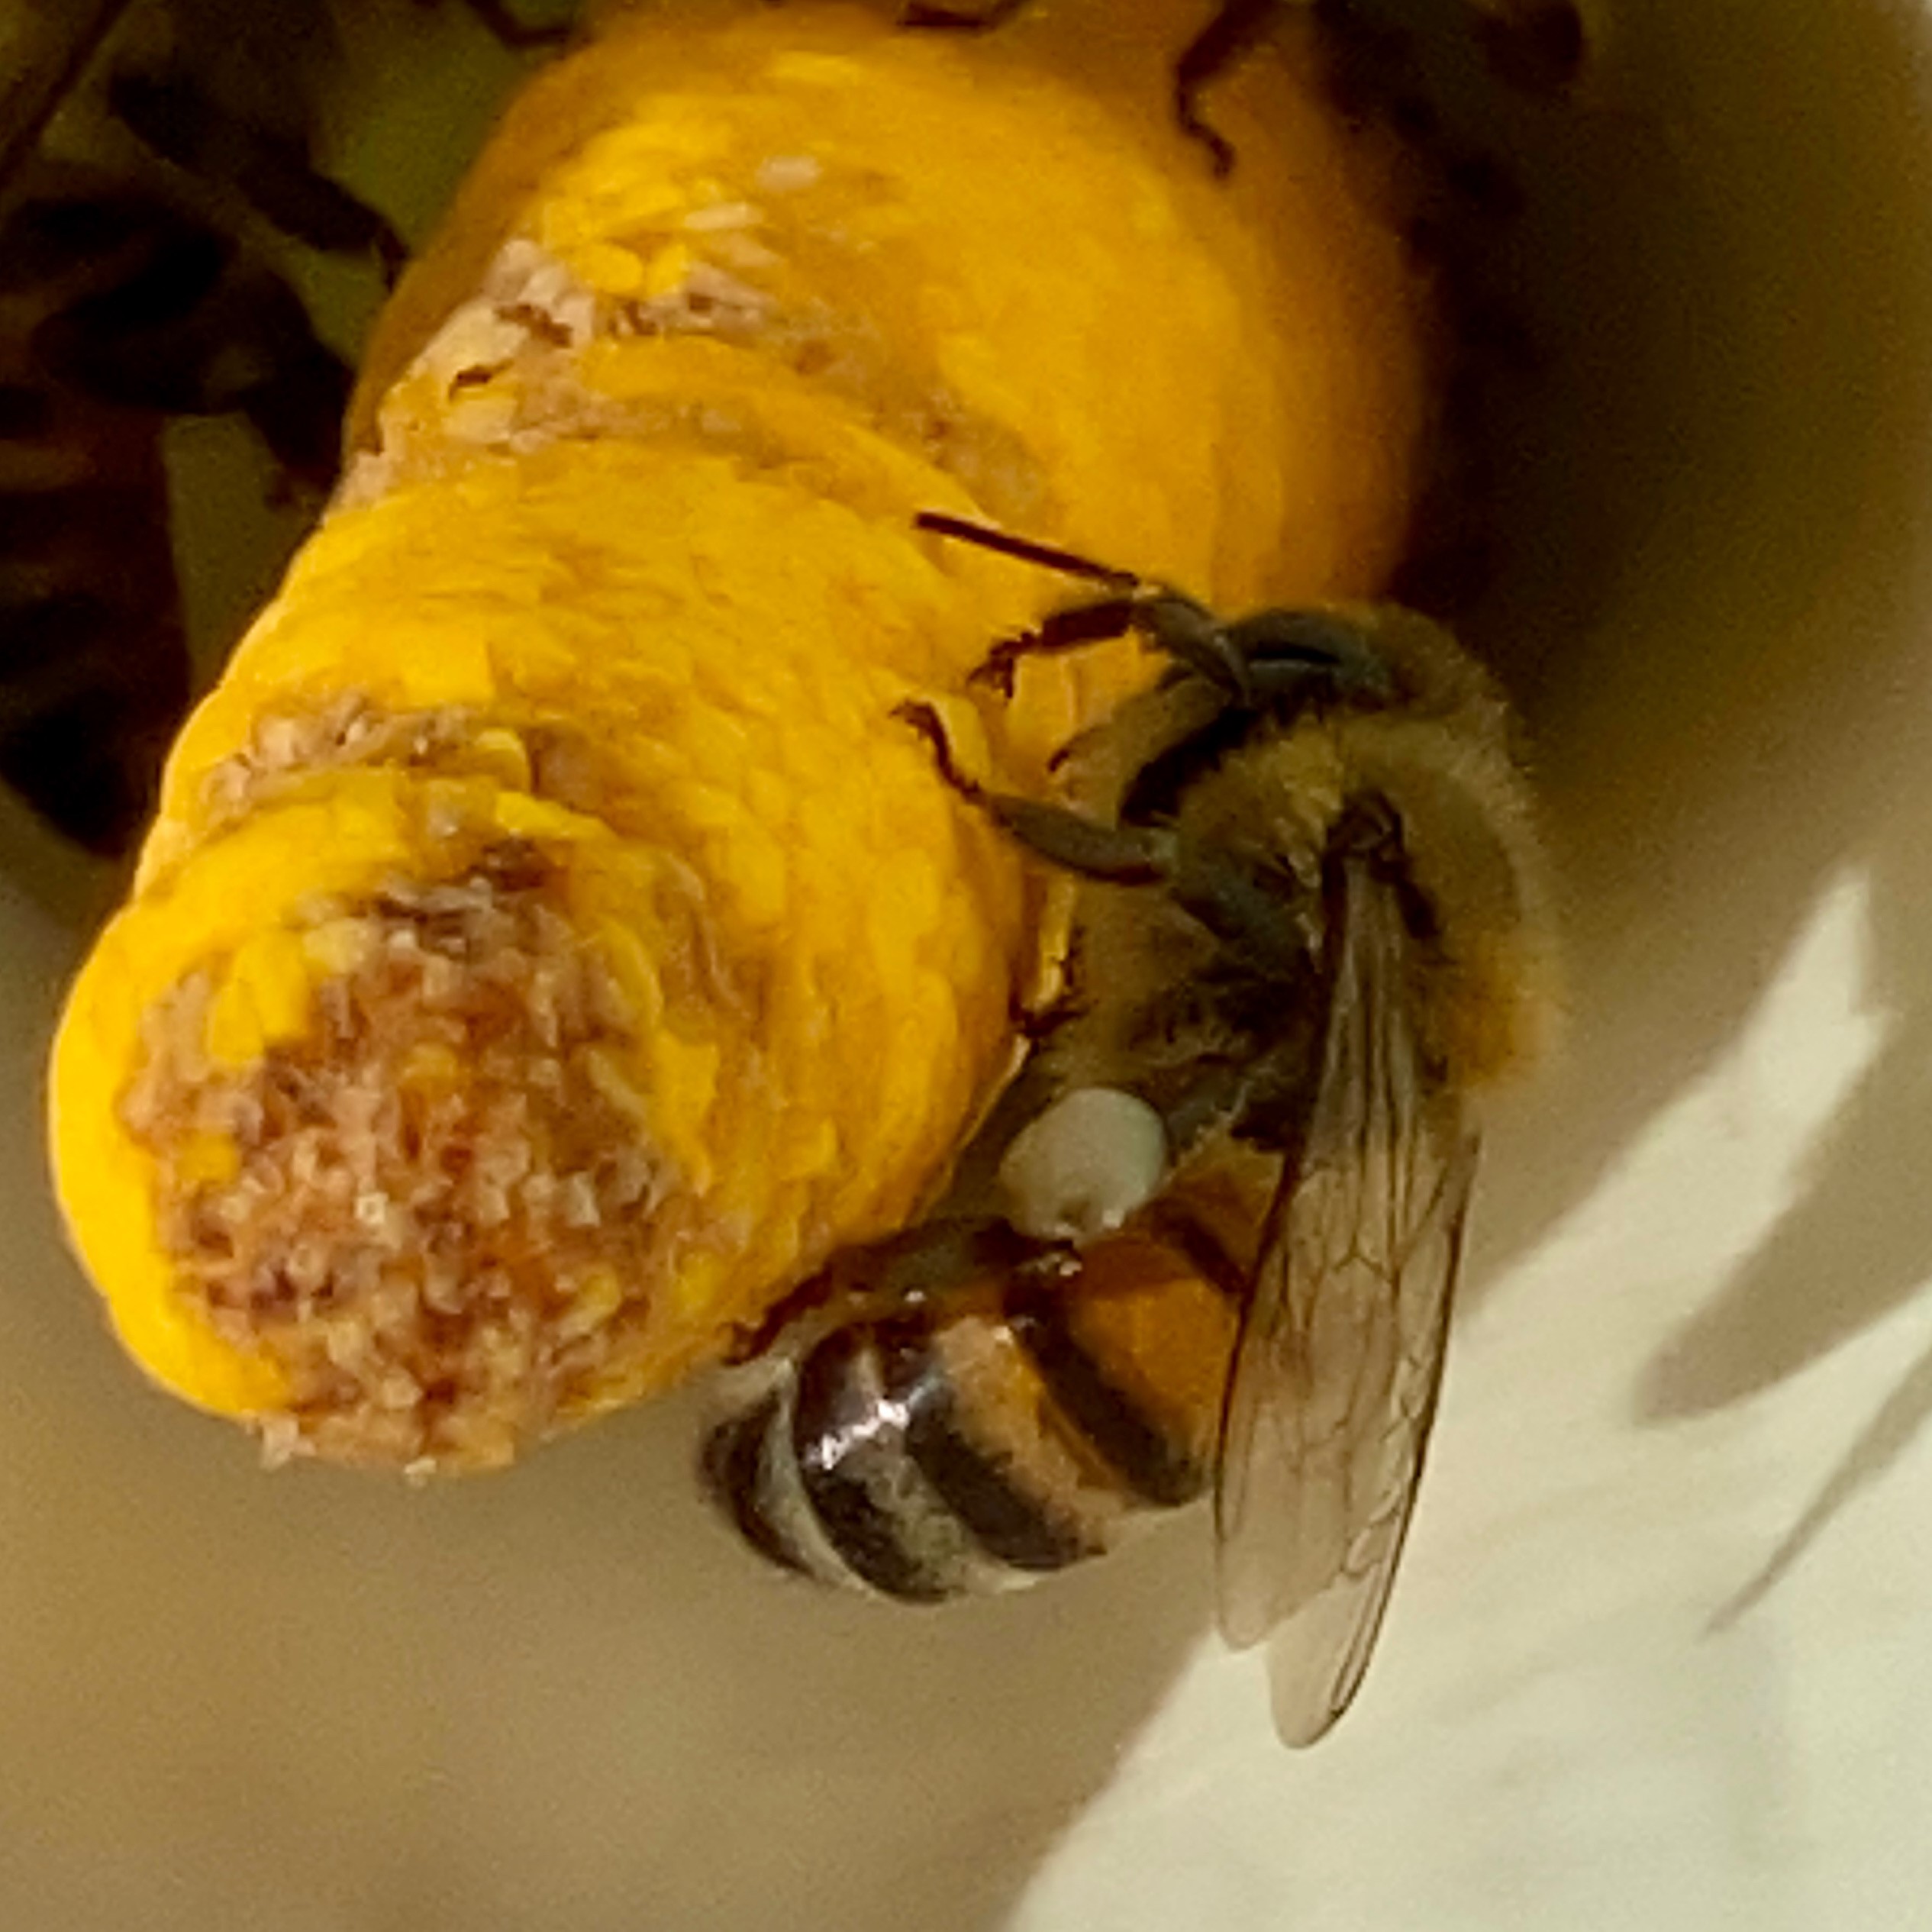 A bee on a honeycomb